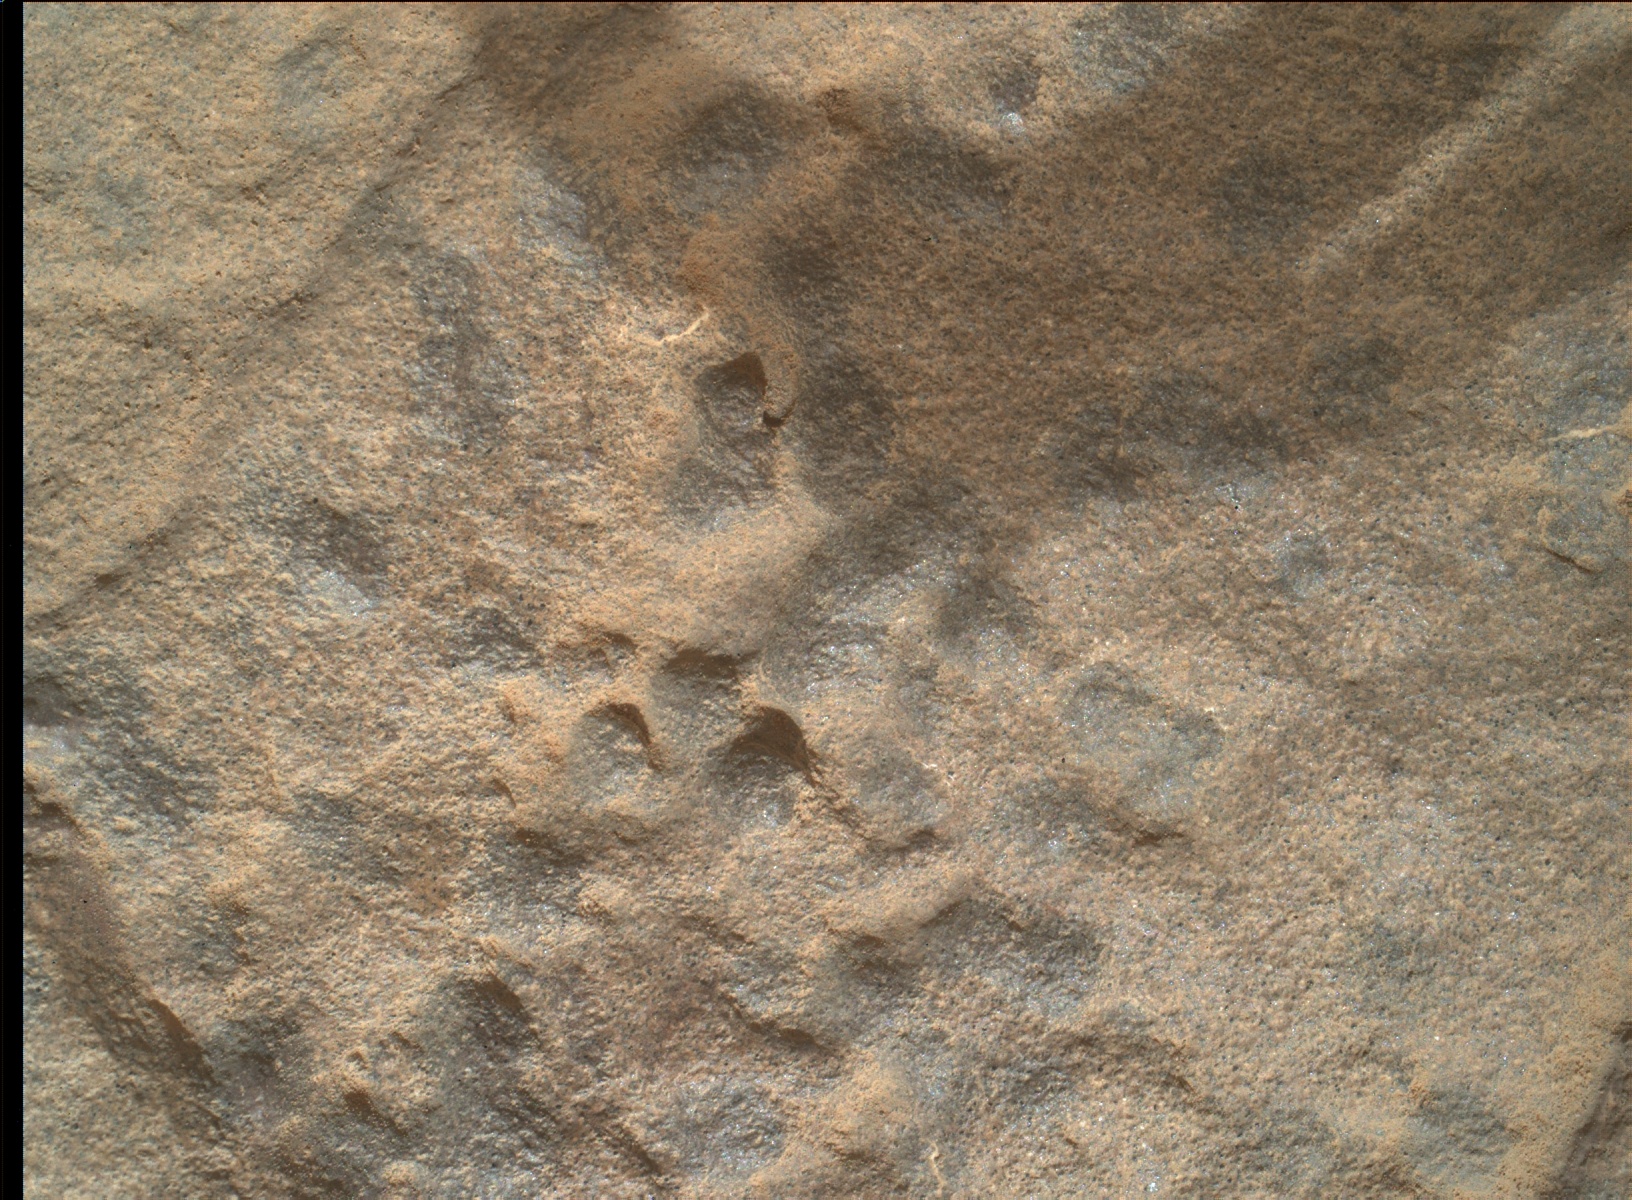 Nasa's Mars rover Curiosity acquired this image using its Mars Hand Lens Imager (MAHLI) on Sol 1715